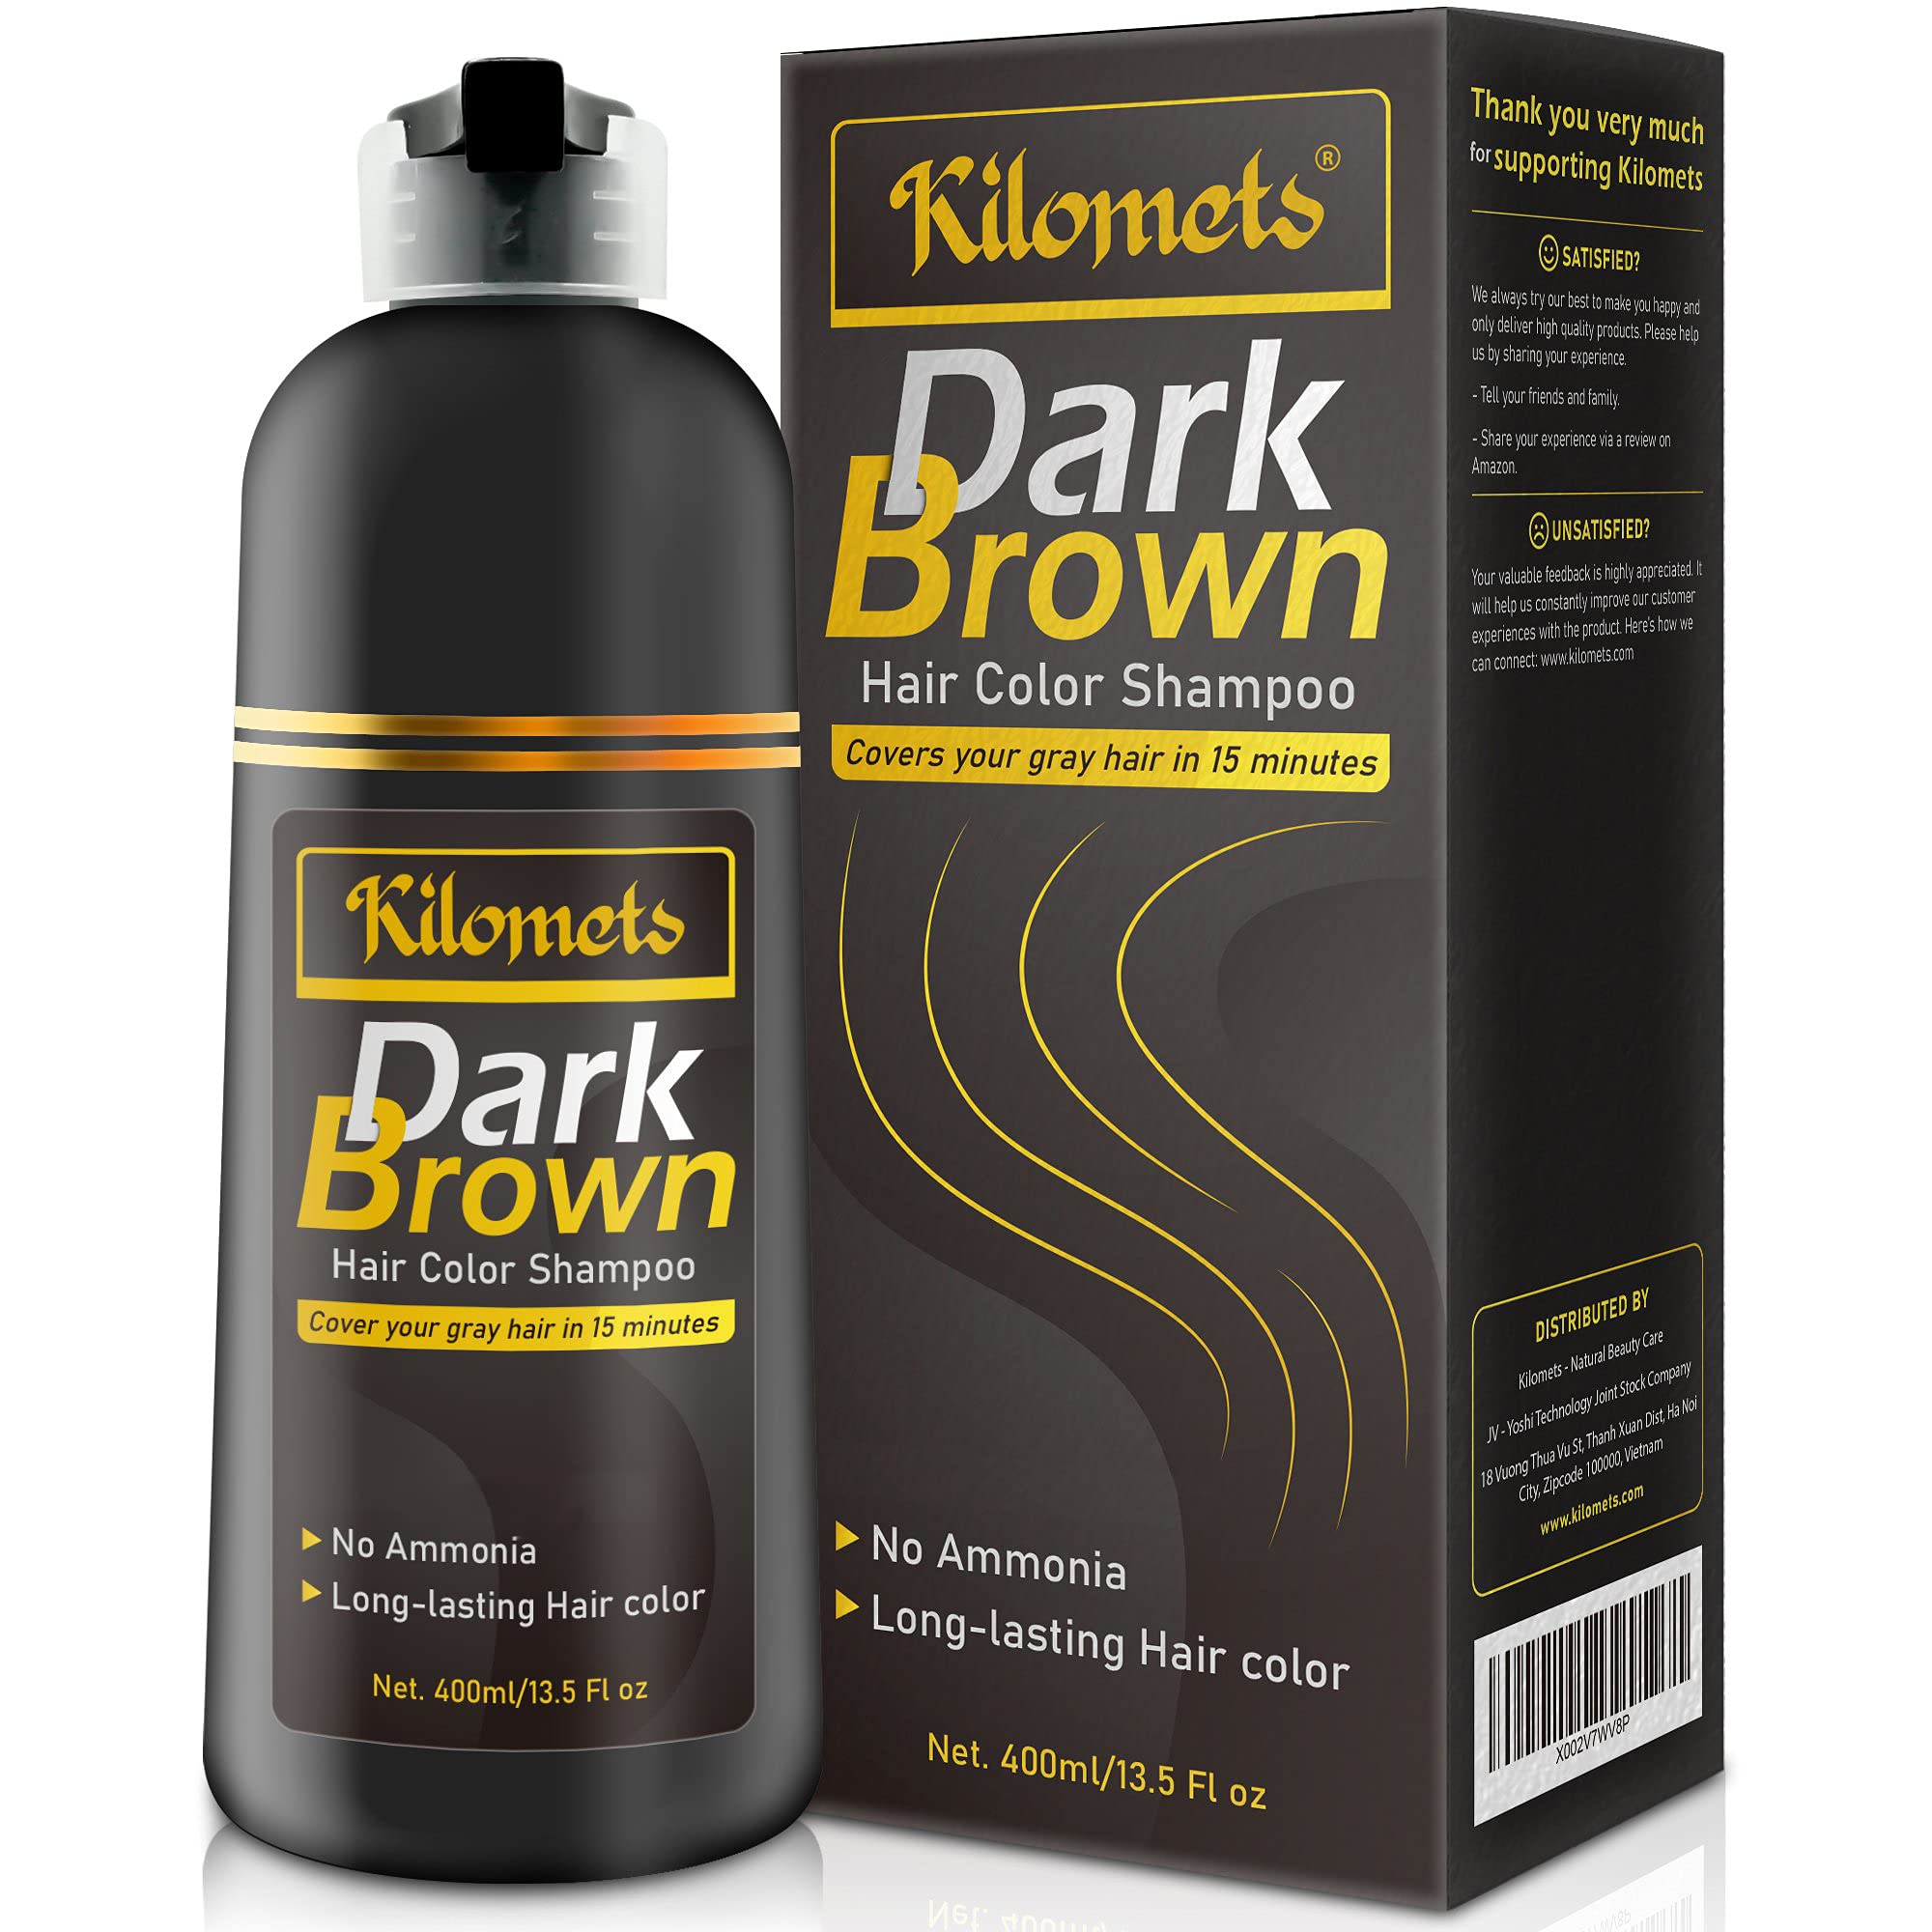 Mua Kilomets Dark Brown Hair Dye Shampoo 400ml- 100% Grey Coverage in  Minutes - Ammonia Free Hair Color Shampoo Gray Silver Hair- Instant Coloring  At Home Gift for Her for Him trên